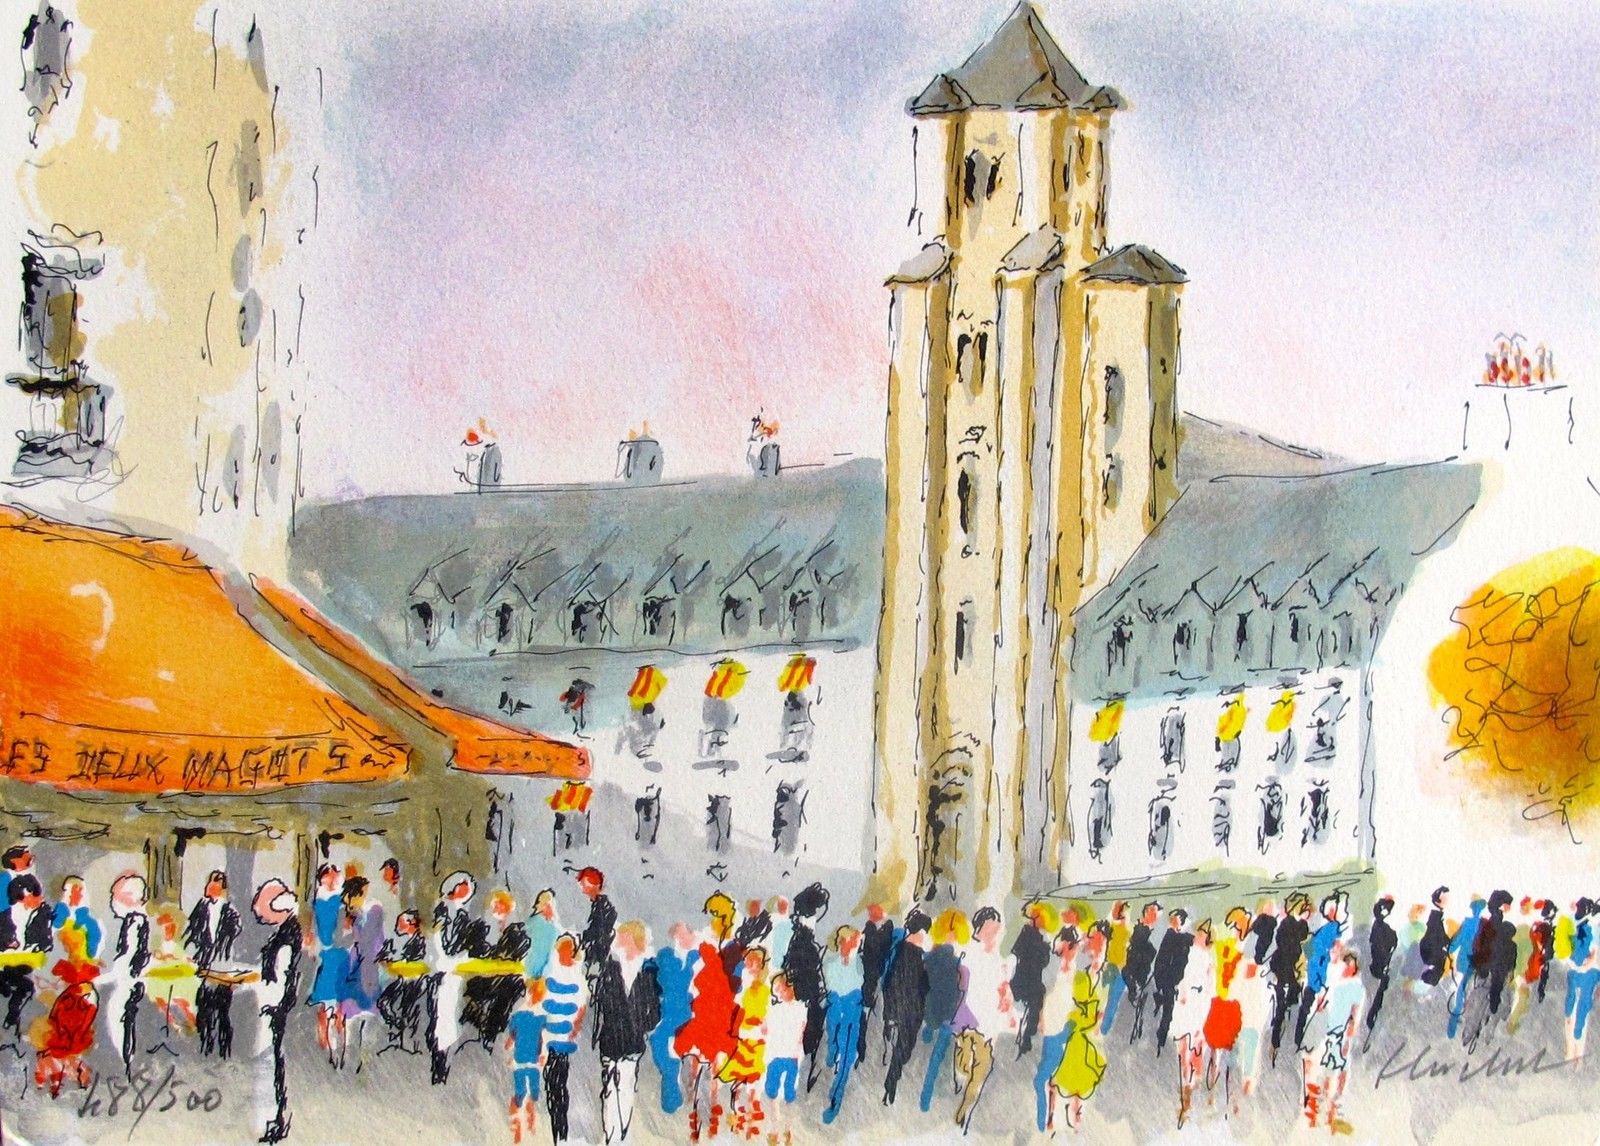 Urbain Huchet ST GERMAIN DE PRES II Hand Signed Limited Edition Lithograph